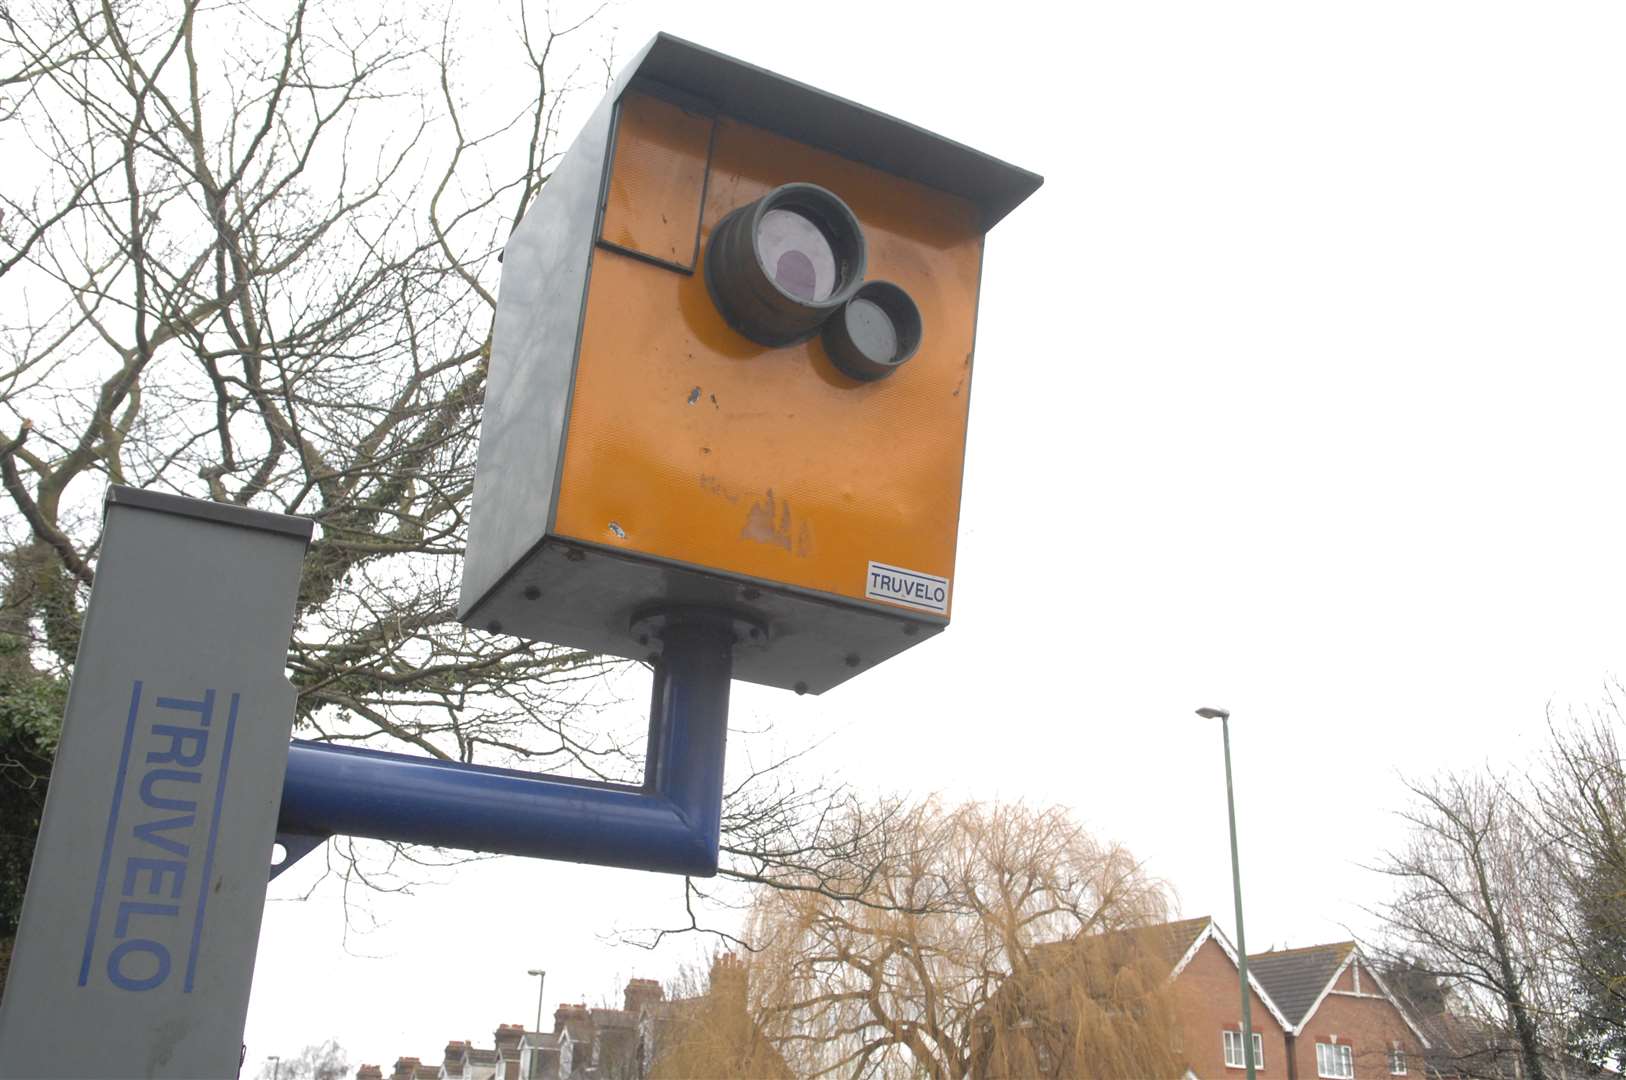 Residents are calling for speed cameras